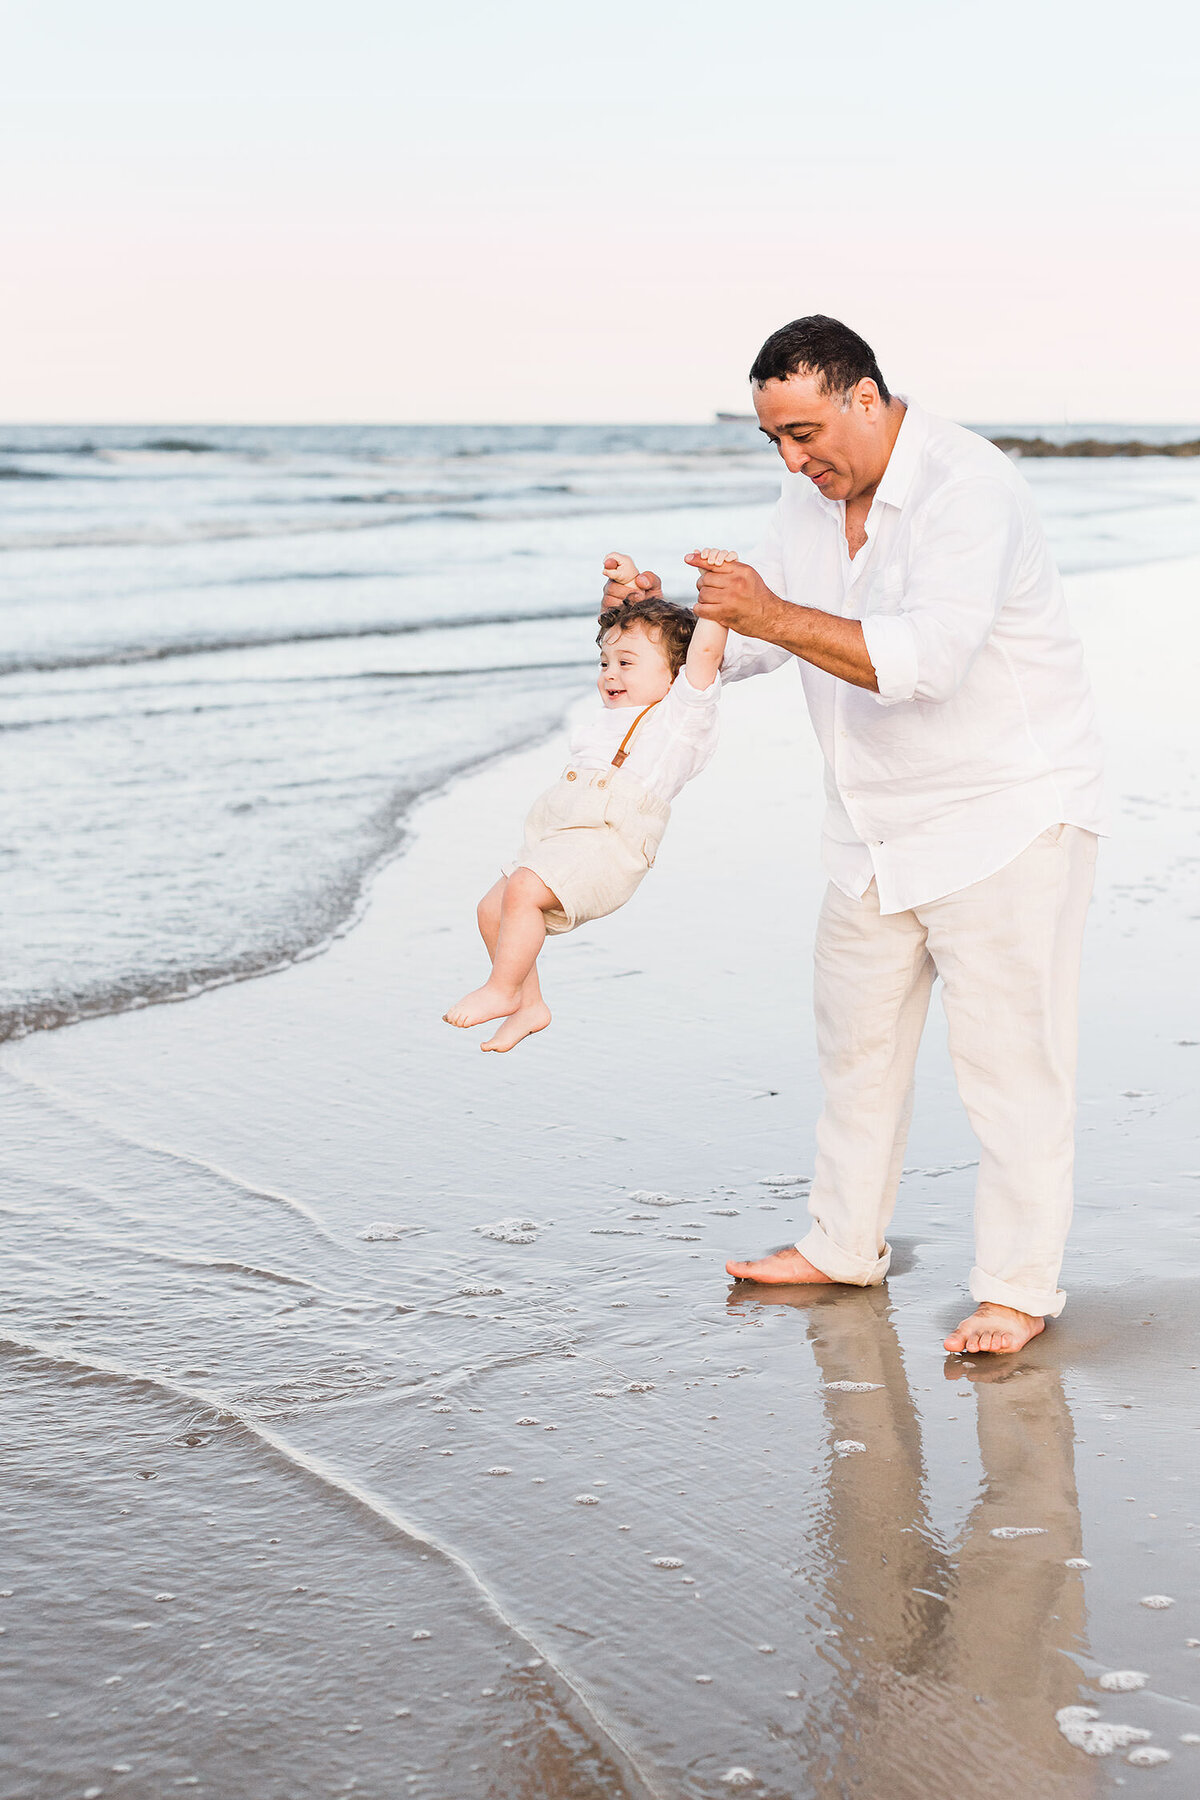 a father dressed in white is swinning around his toddler near the ocean